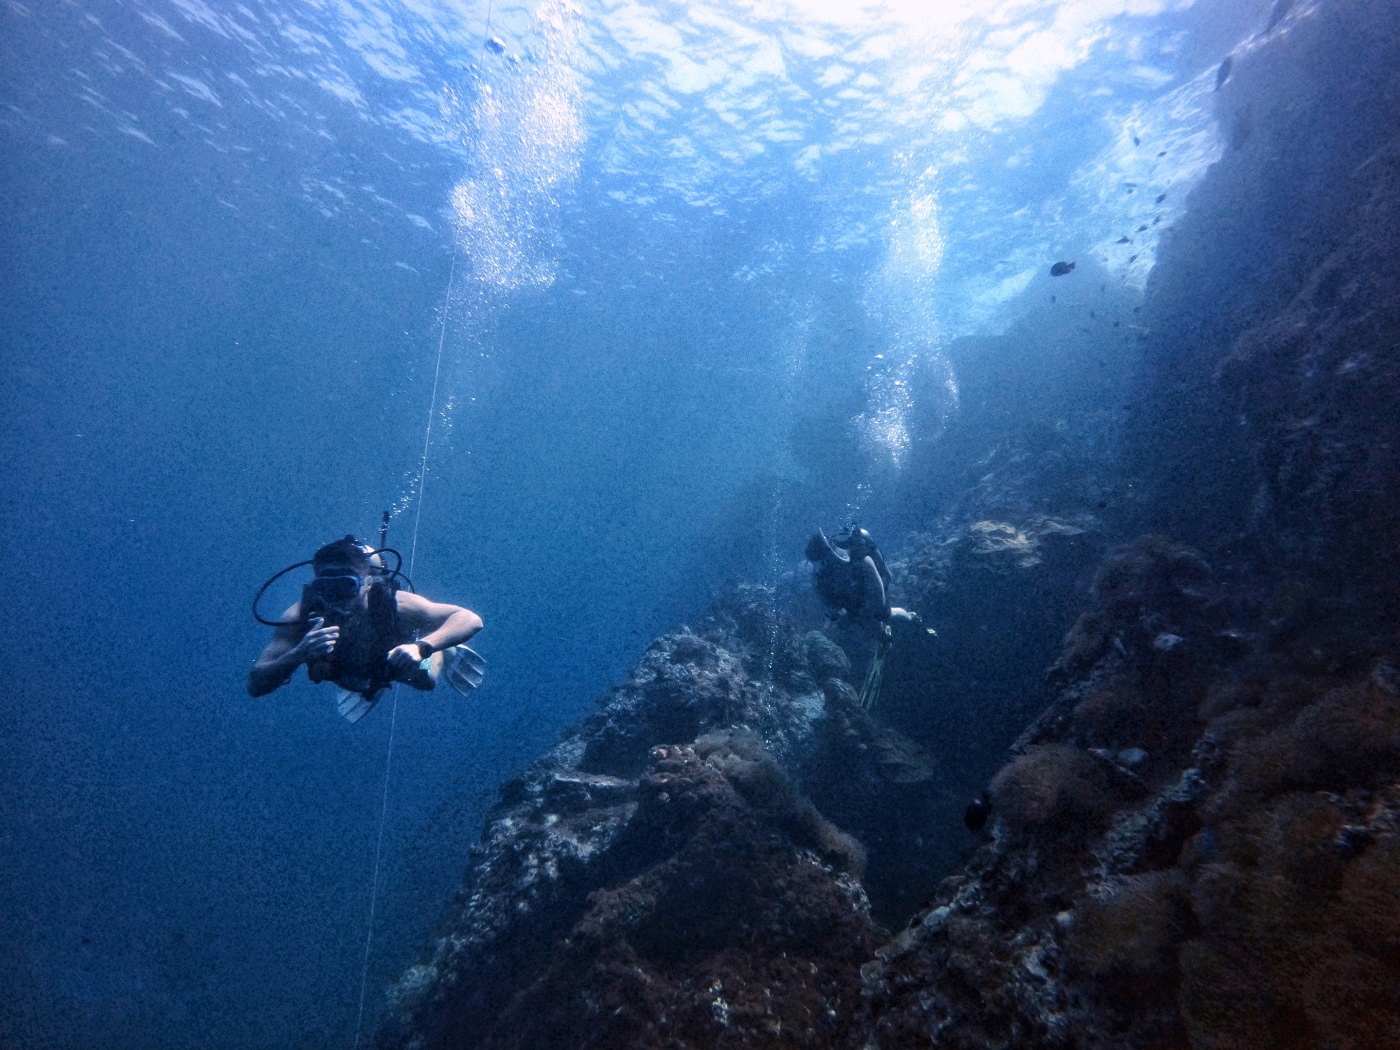 Two divers at Sail Rock, Gulf of Thailand